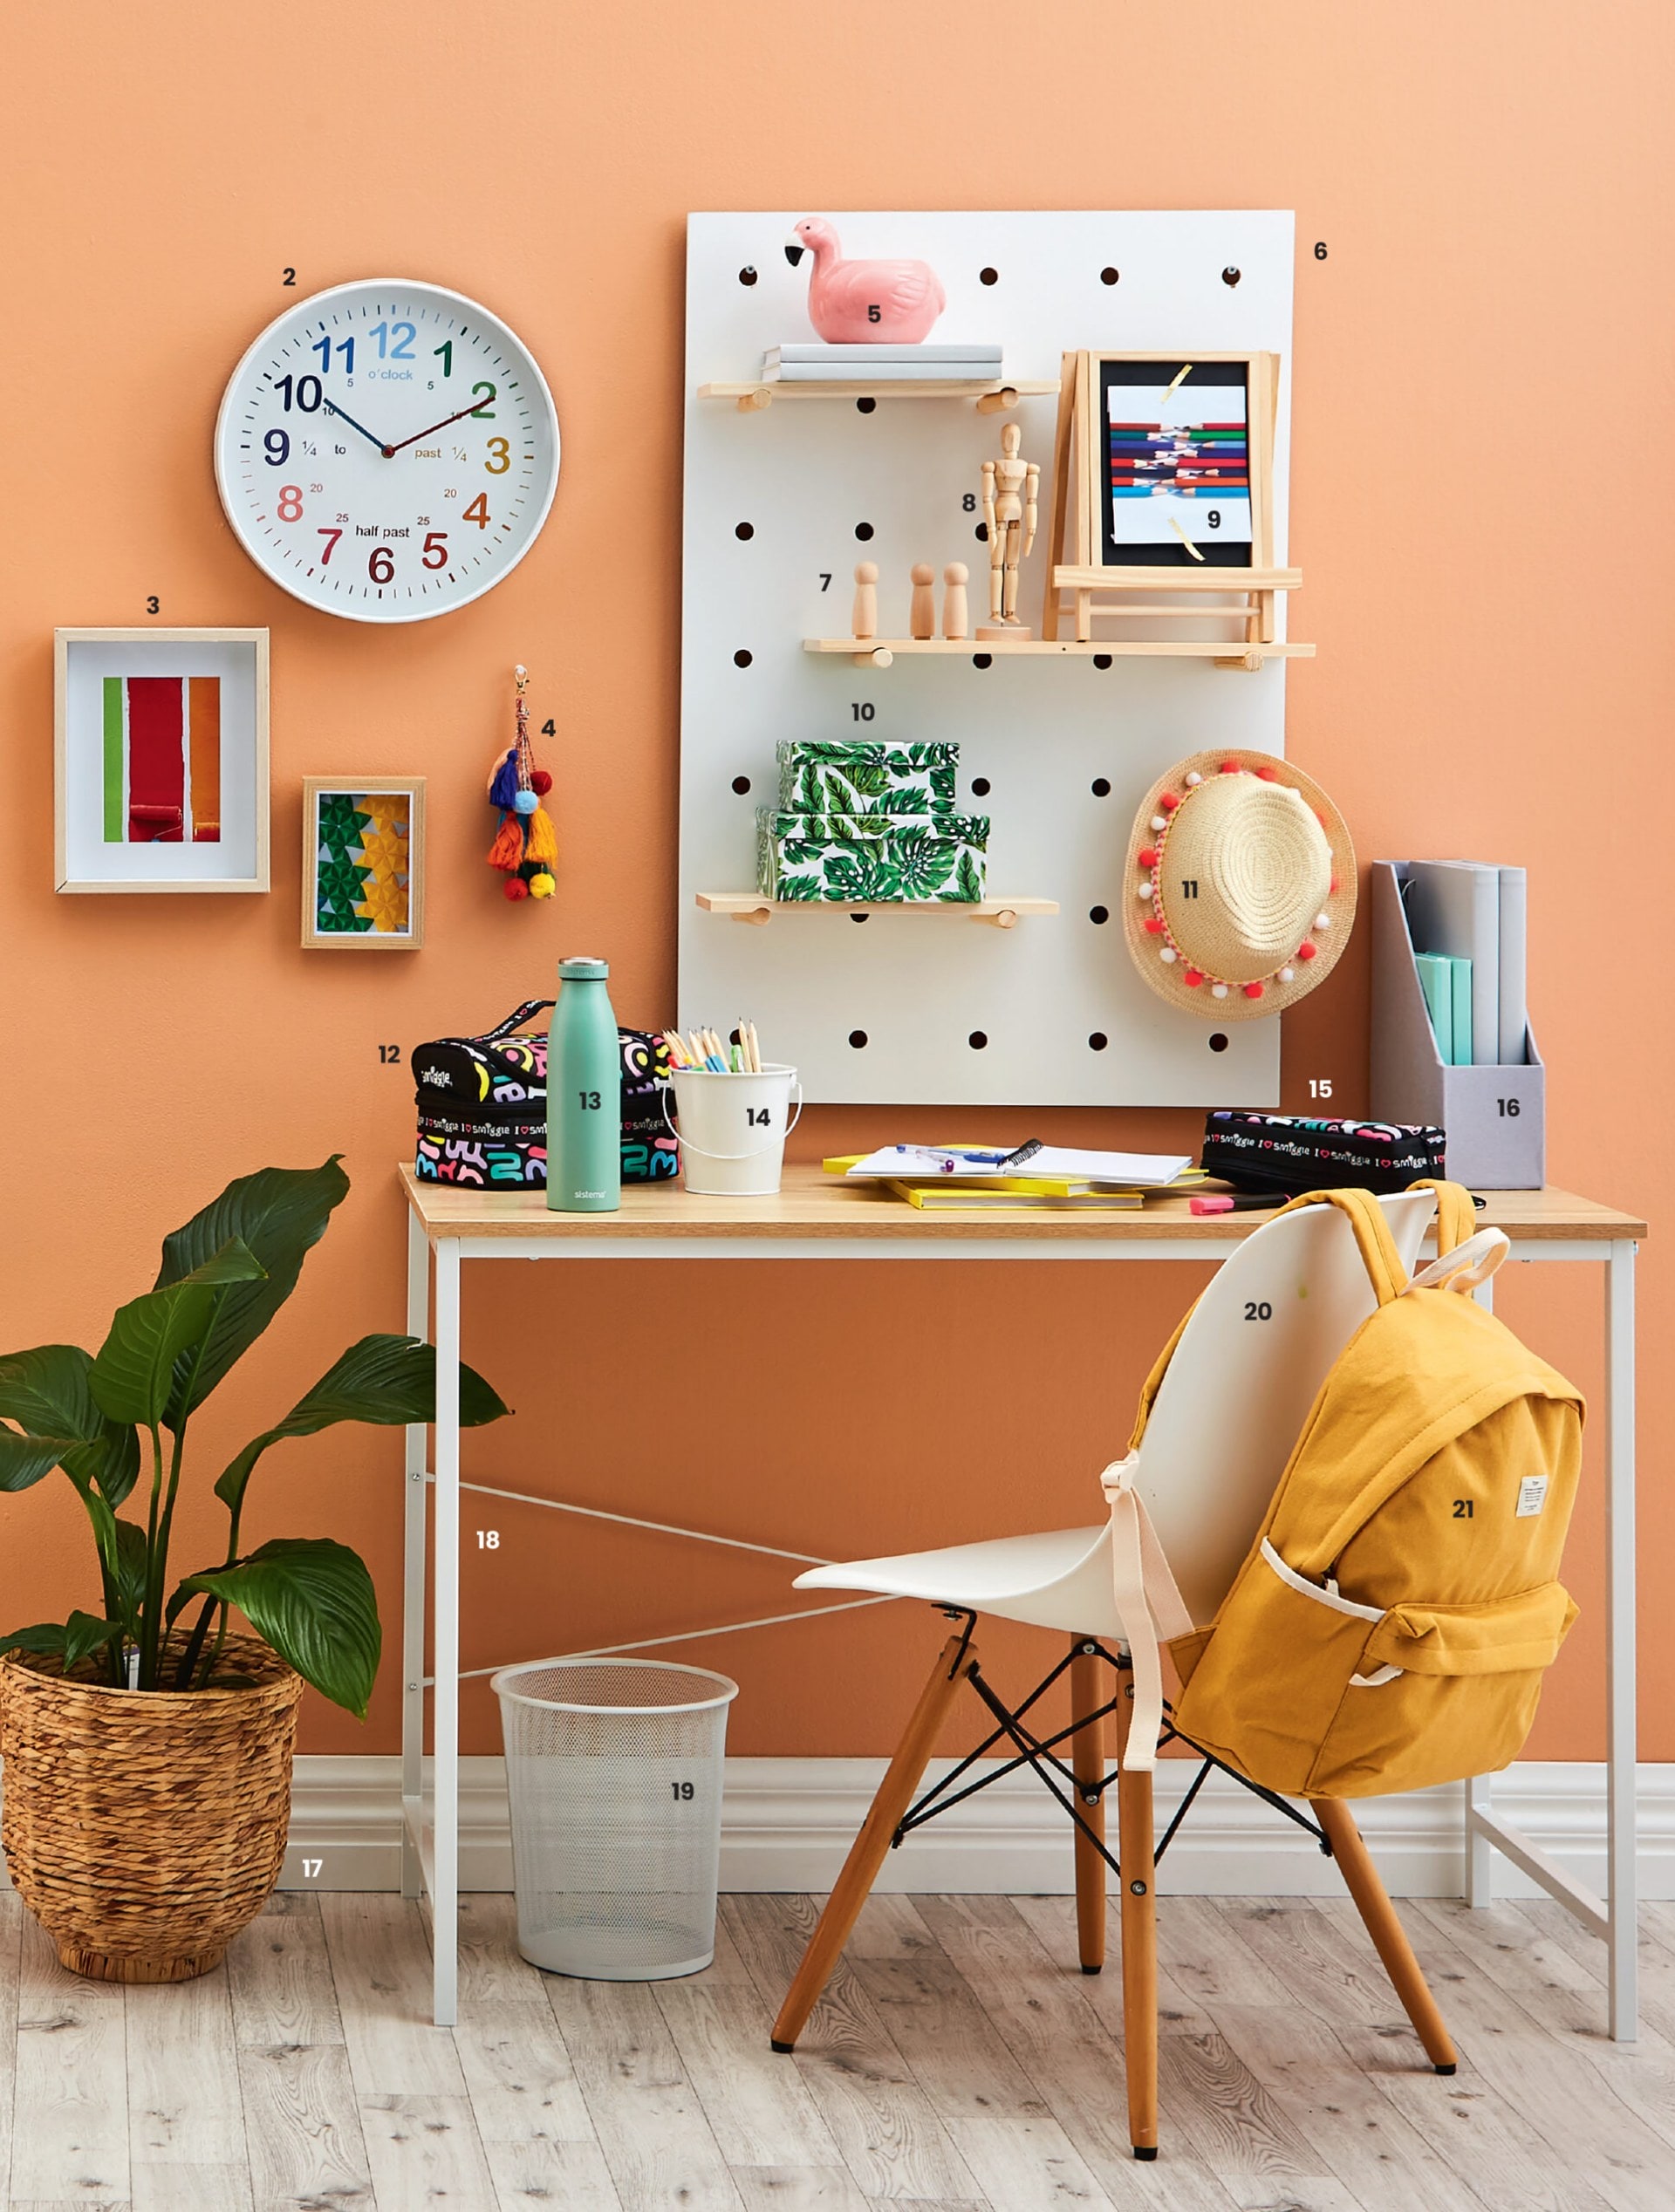 Child's bedroom desk with yellow backpack hanging off the back of white chair